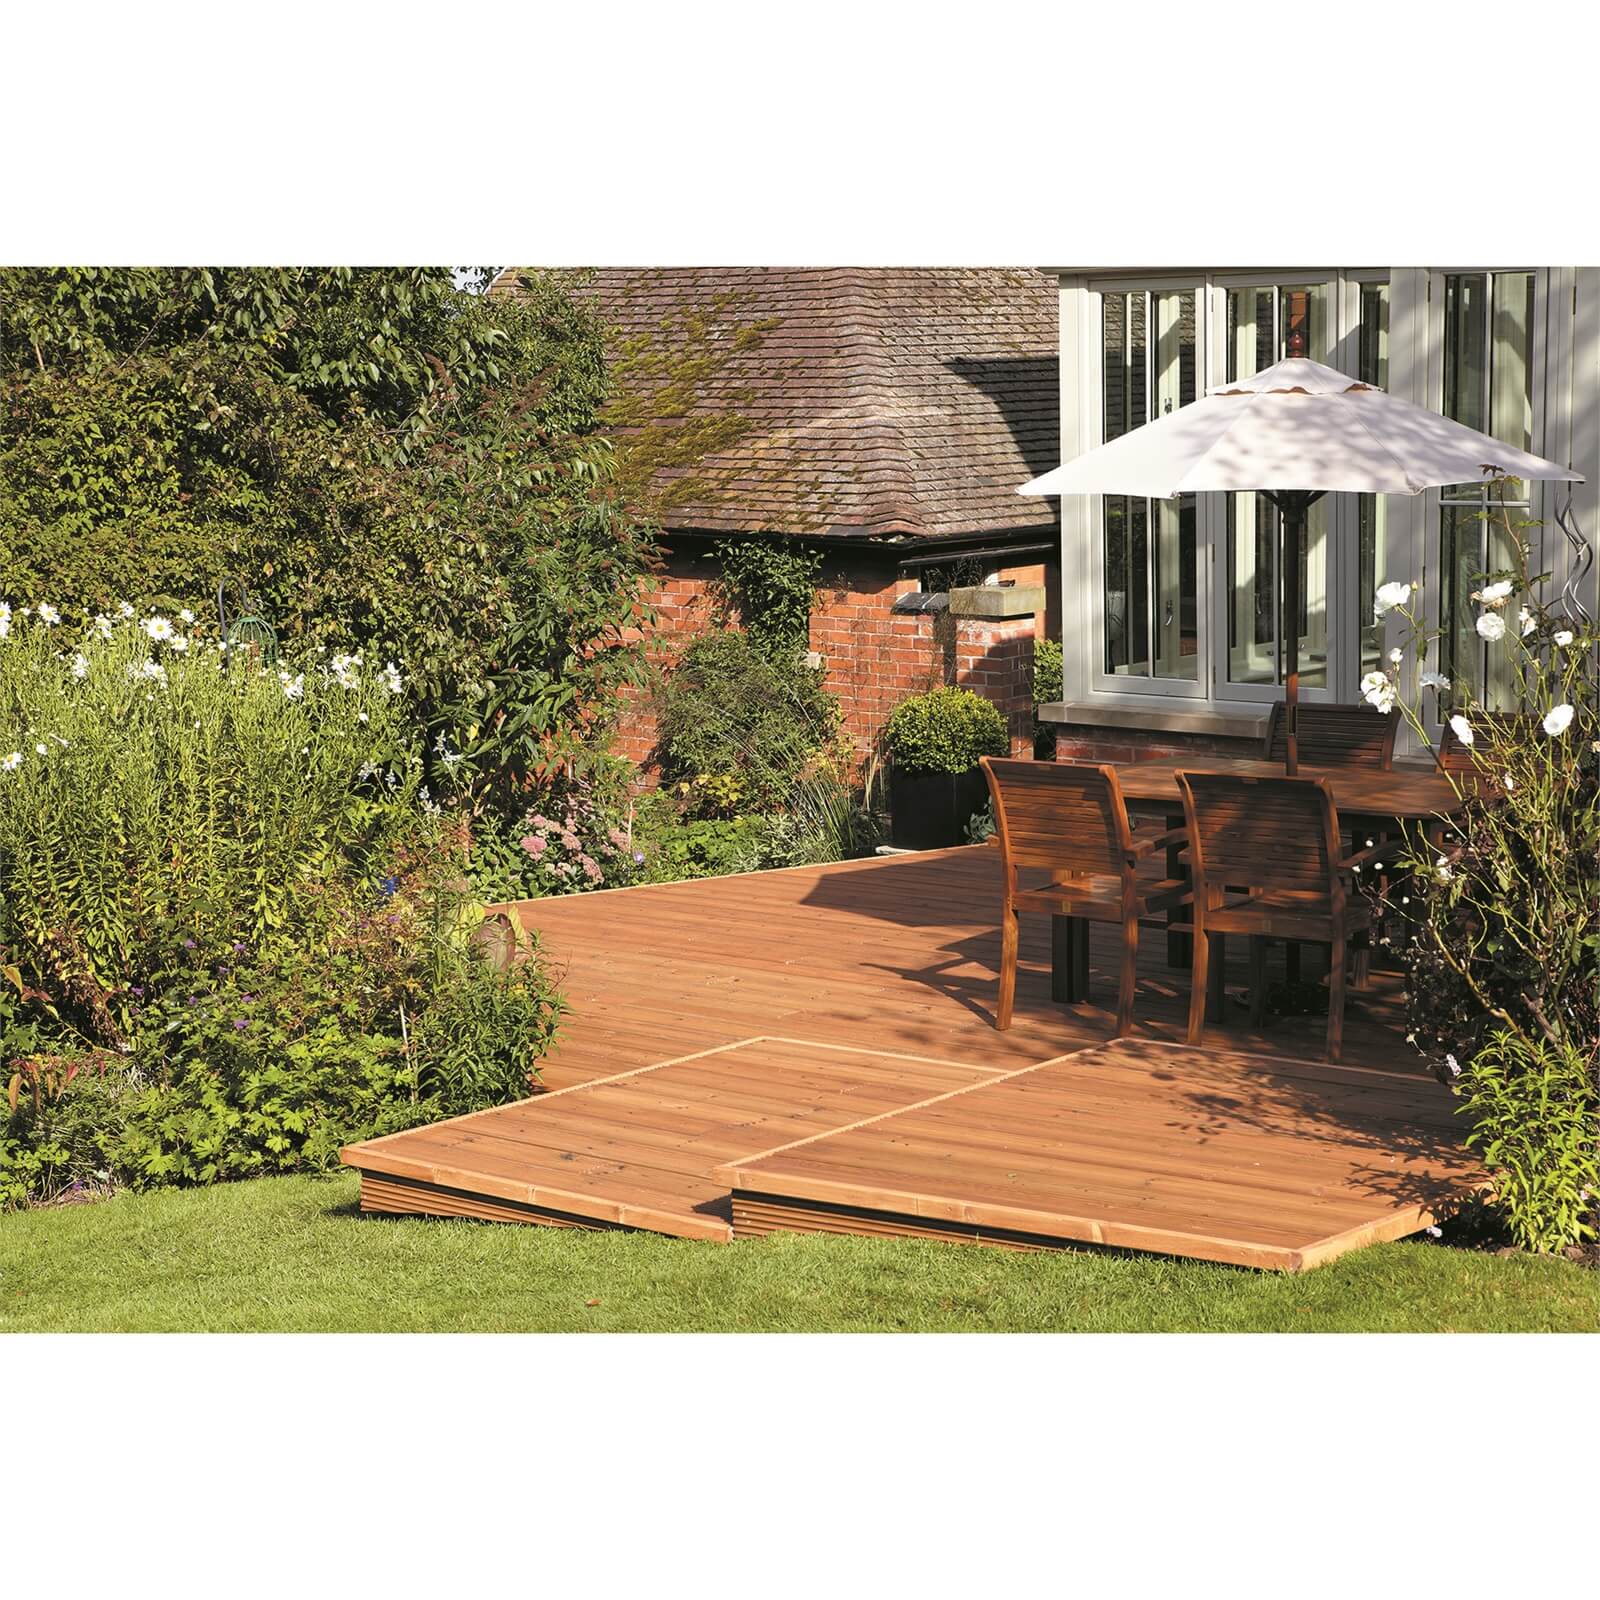 Ronseal Decking Stain Country Oak - 2.5L